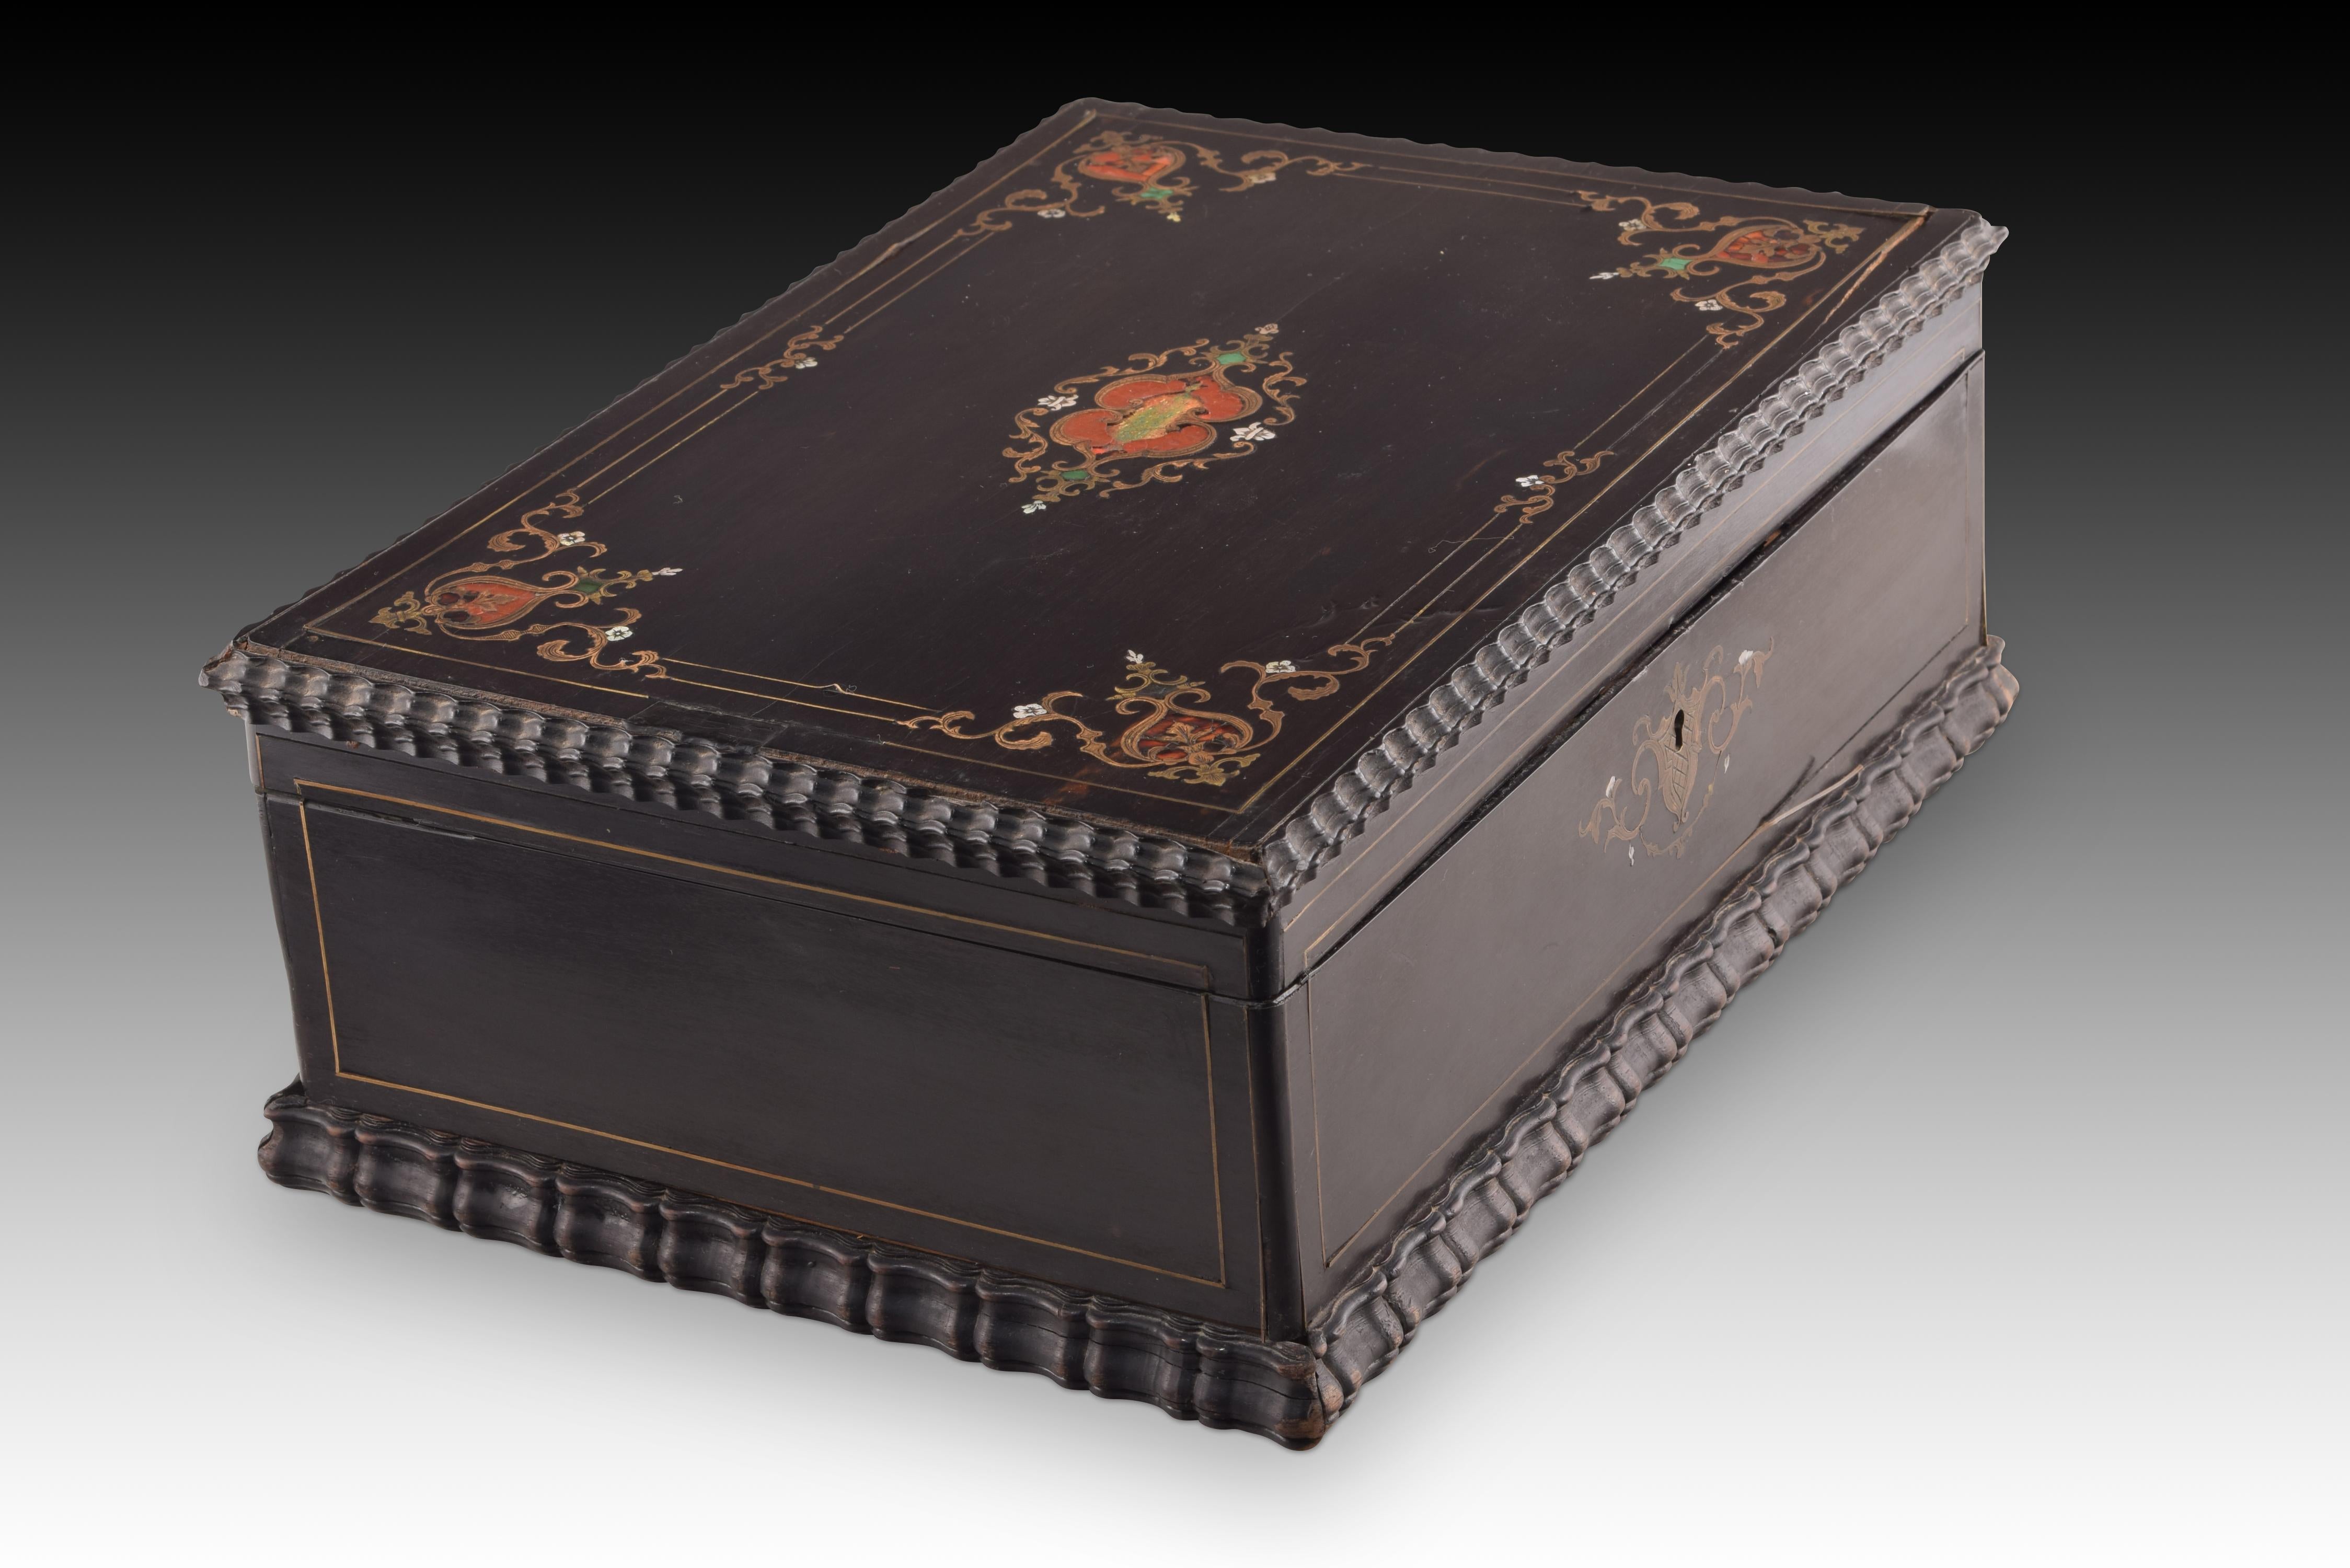 Box with metal marquetry. Wood, metal. Possibly French school, 19th century. 
Has damage. Requires restoration. 
Rectangular chest with a flat lid that has a dark wood interior decorated on the lid with two metallic lines, and a black exterior with